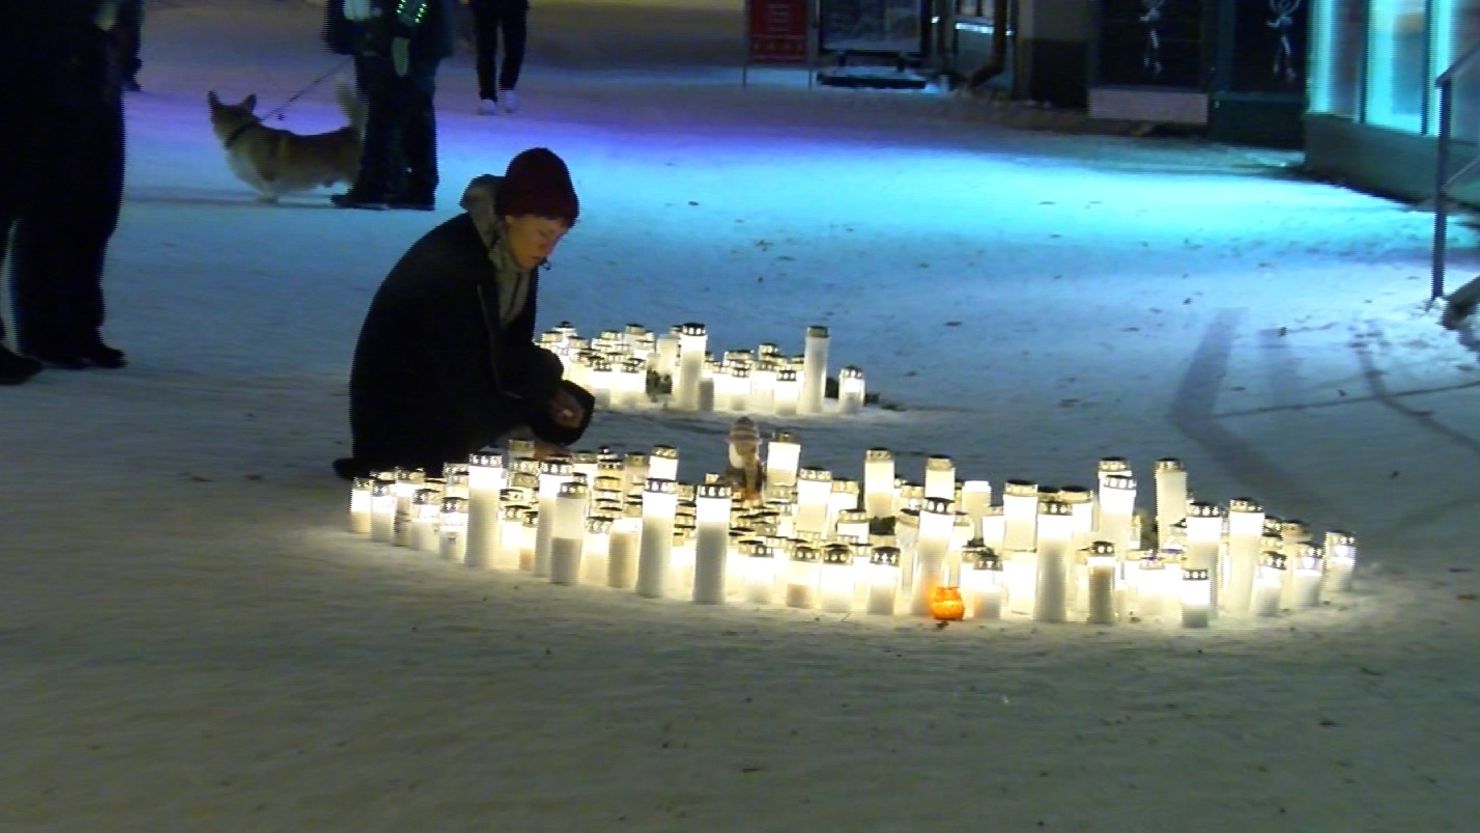 A candlelight vigil at the scene of the shooting.